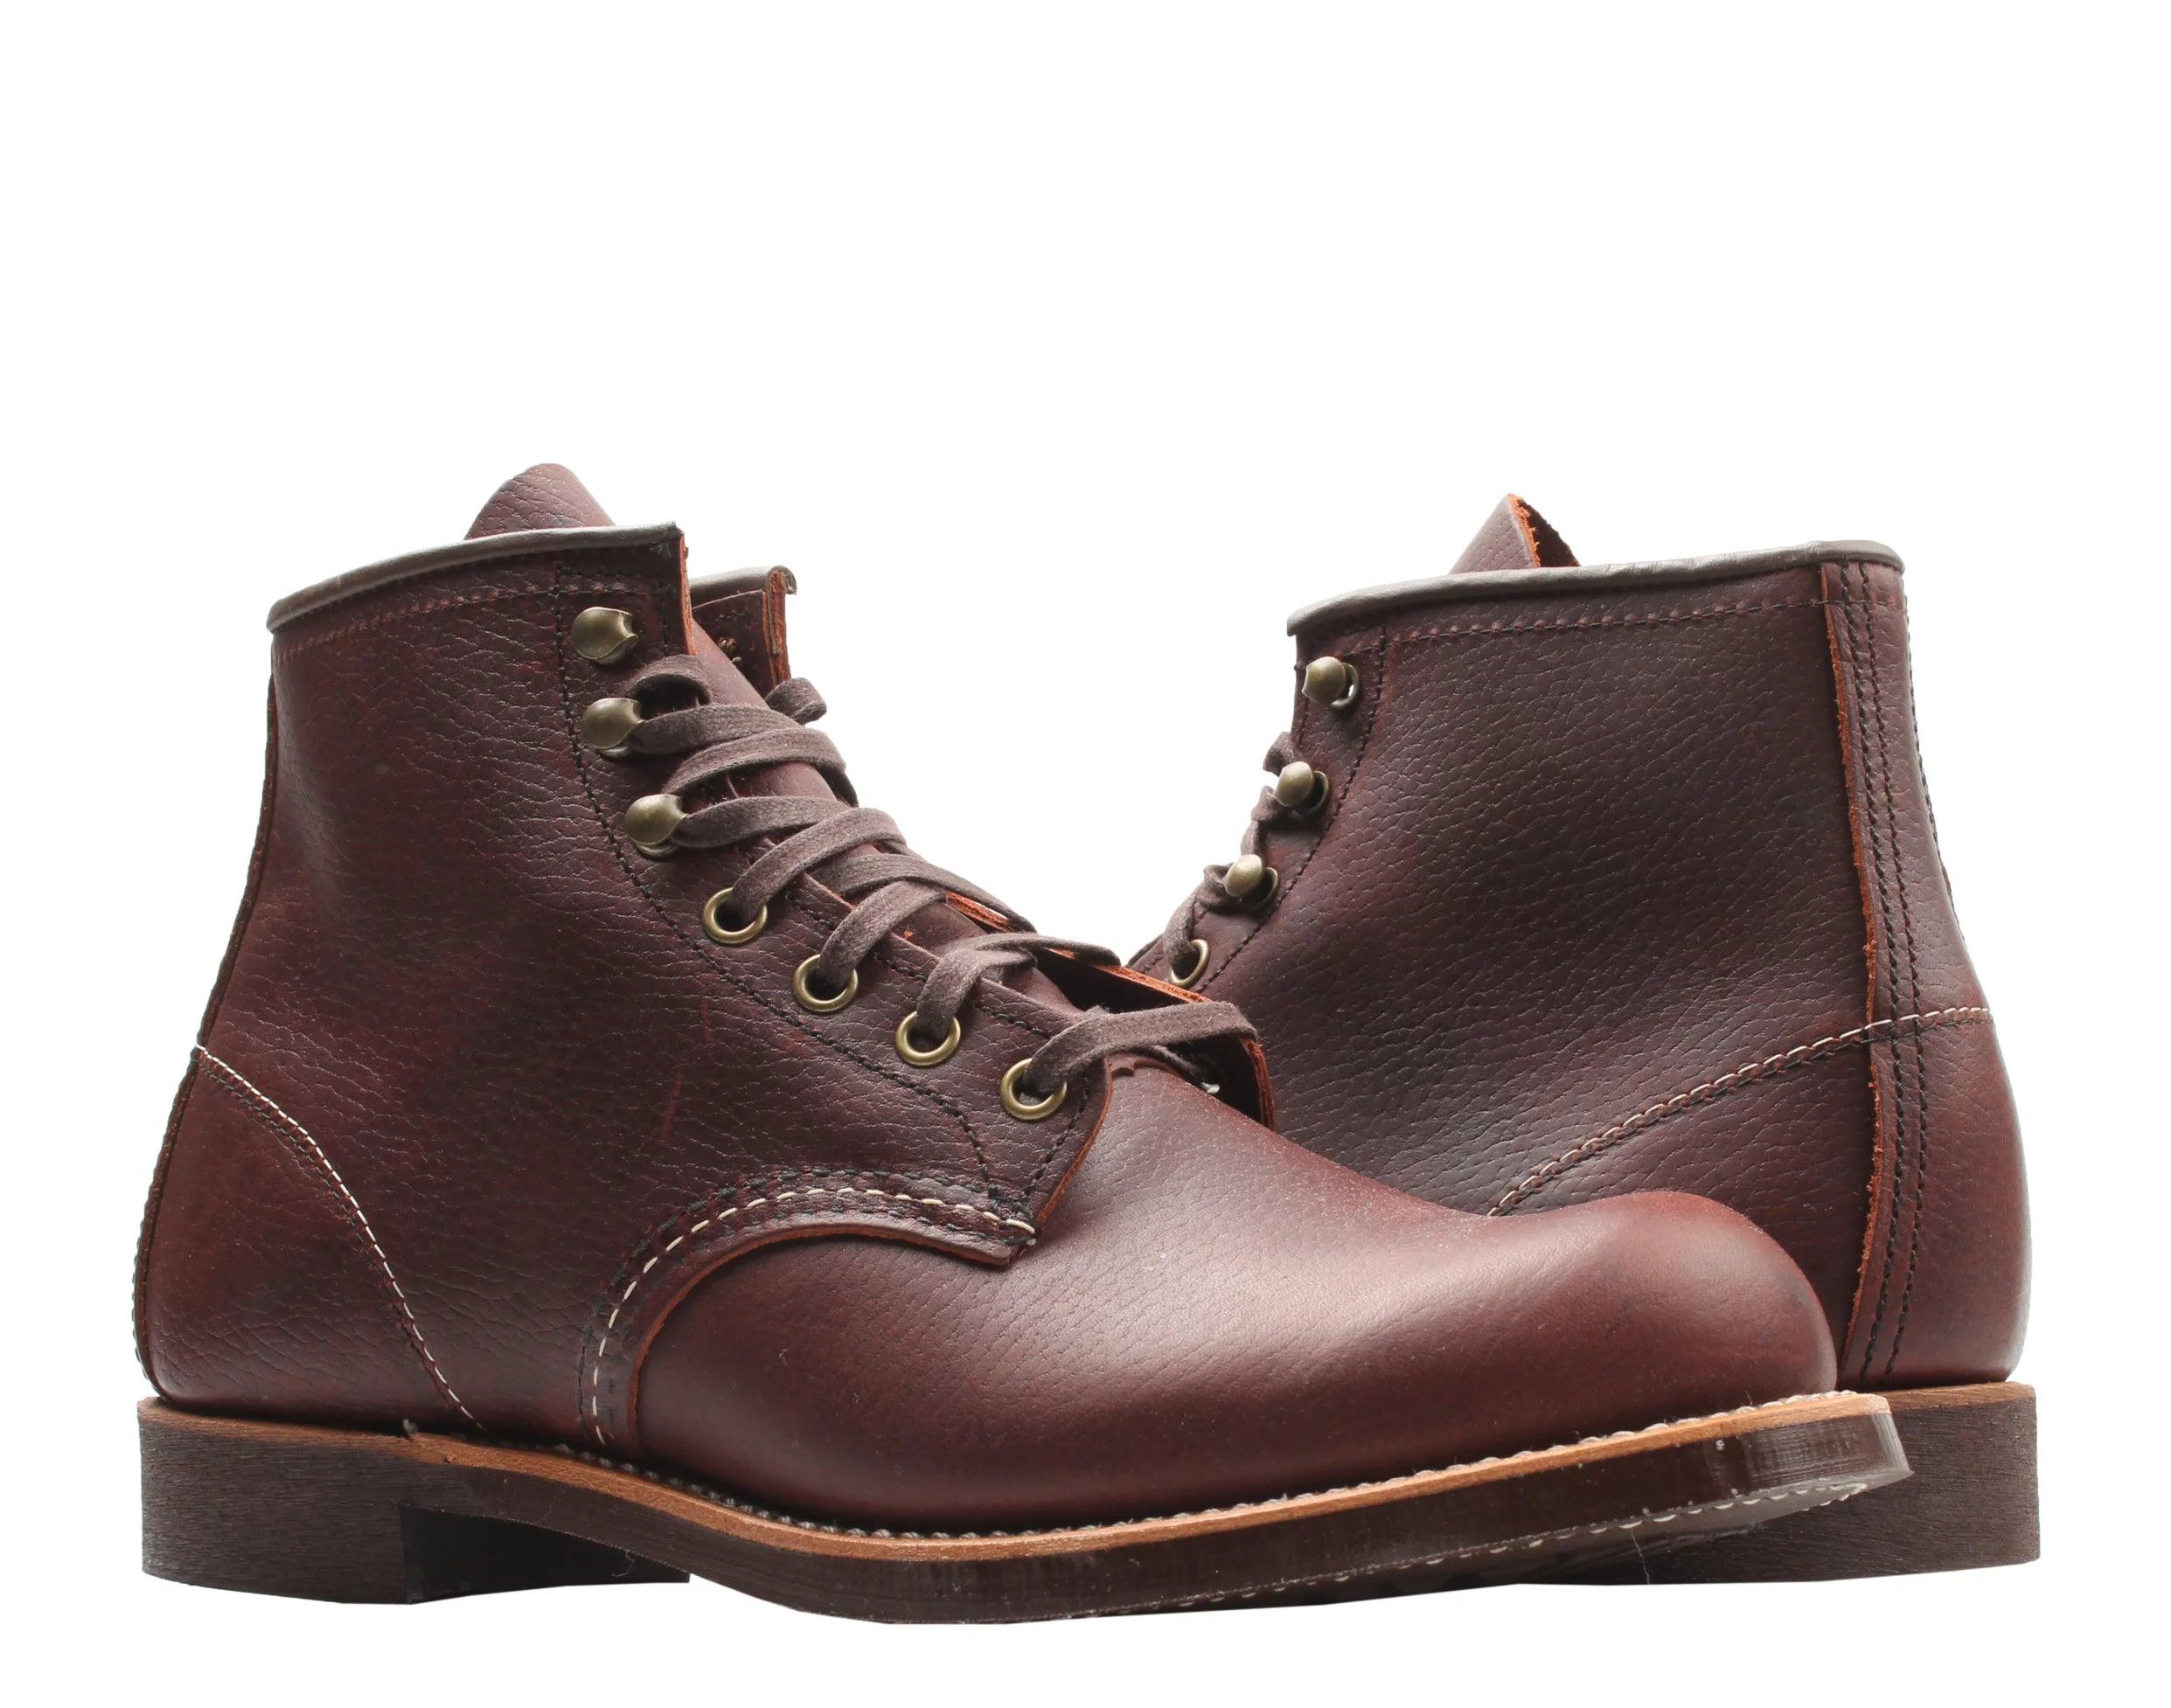 Red Wing 3340 - Blacksmith - Briar Oil Slick - Guilty Party